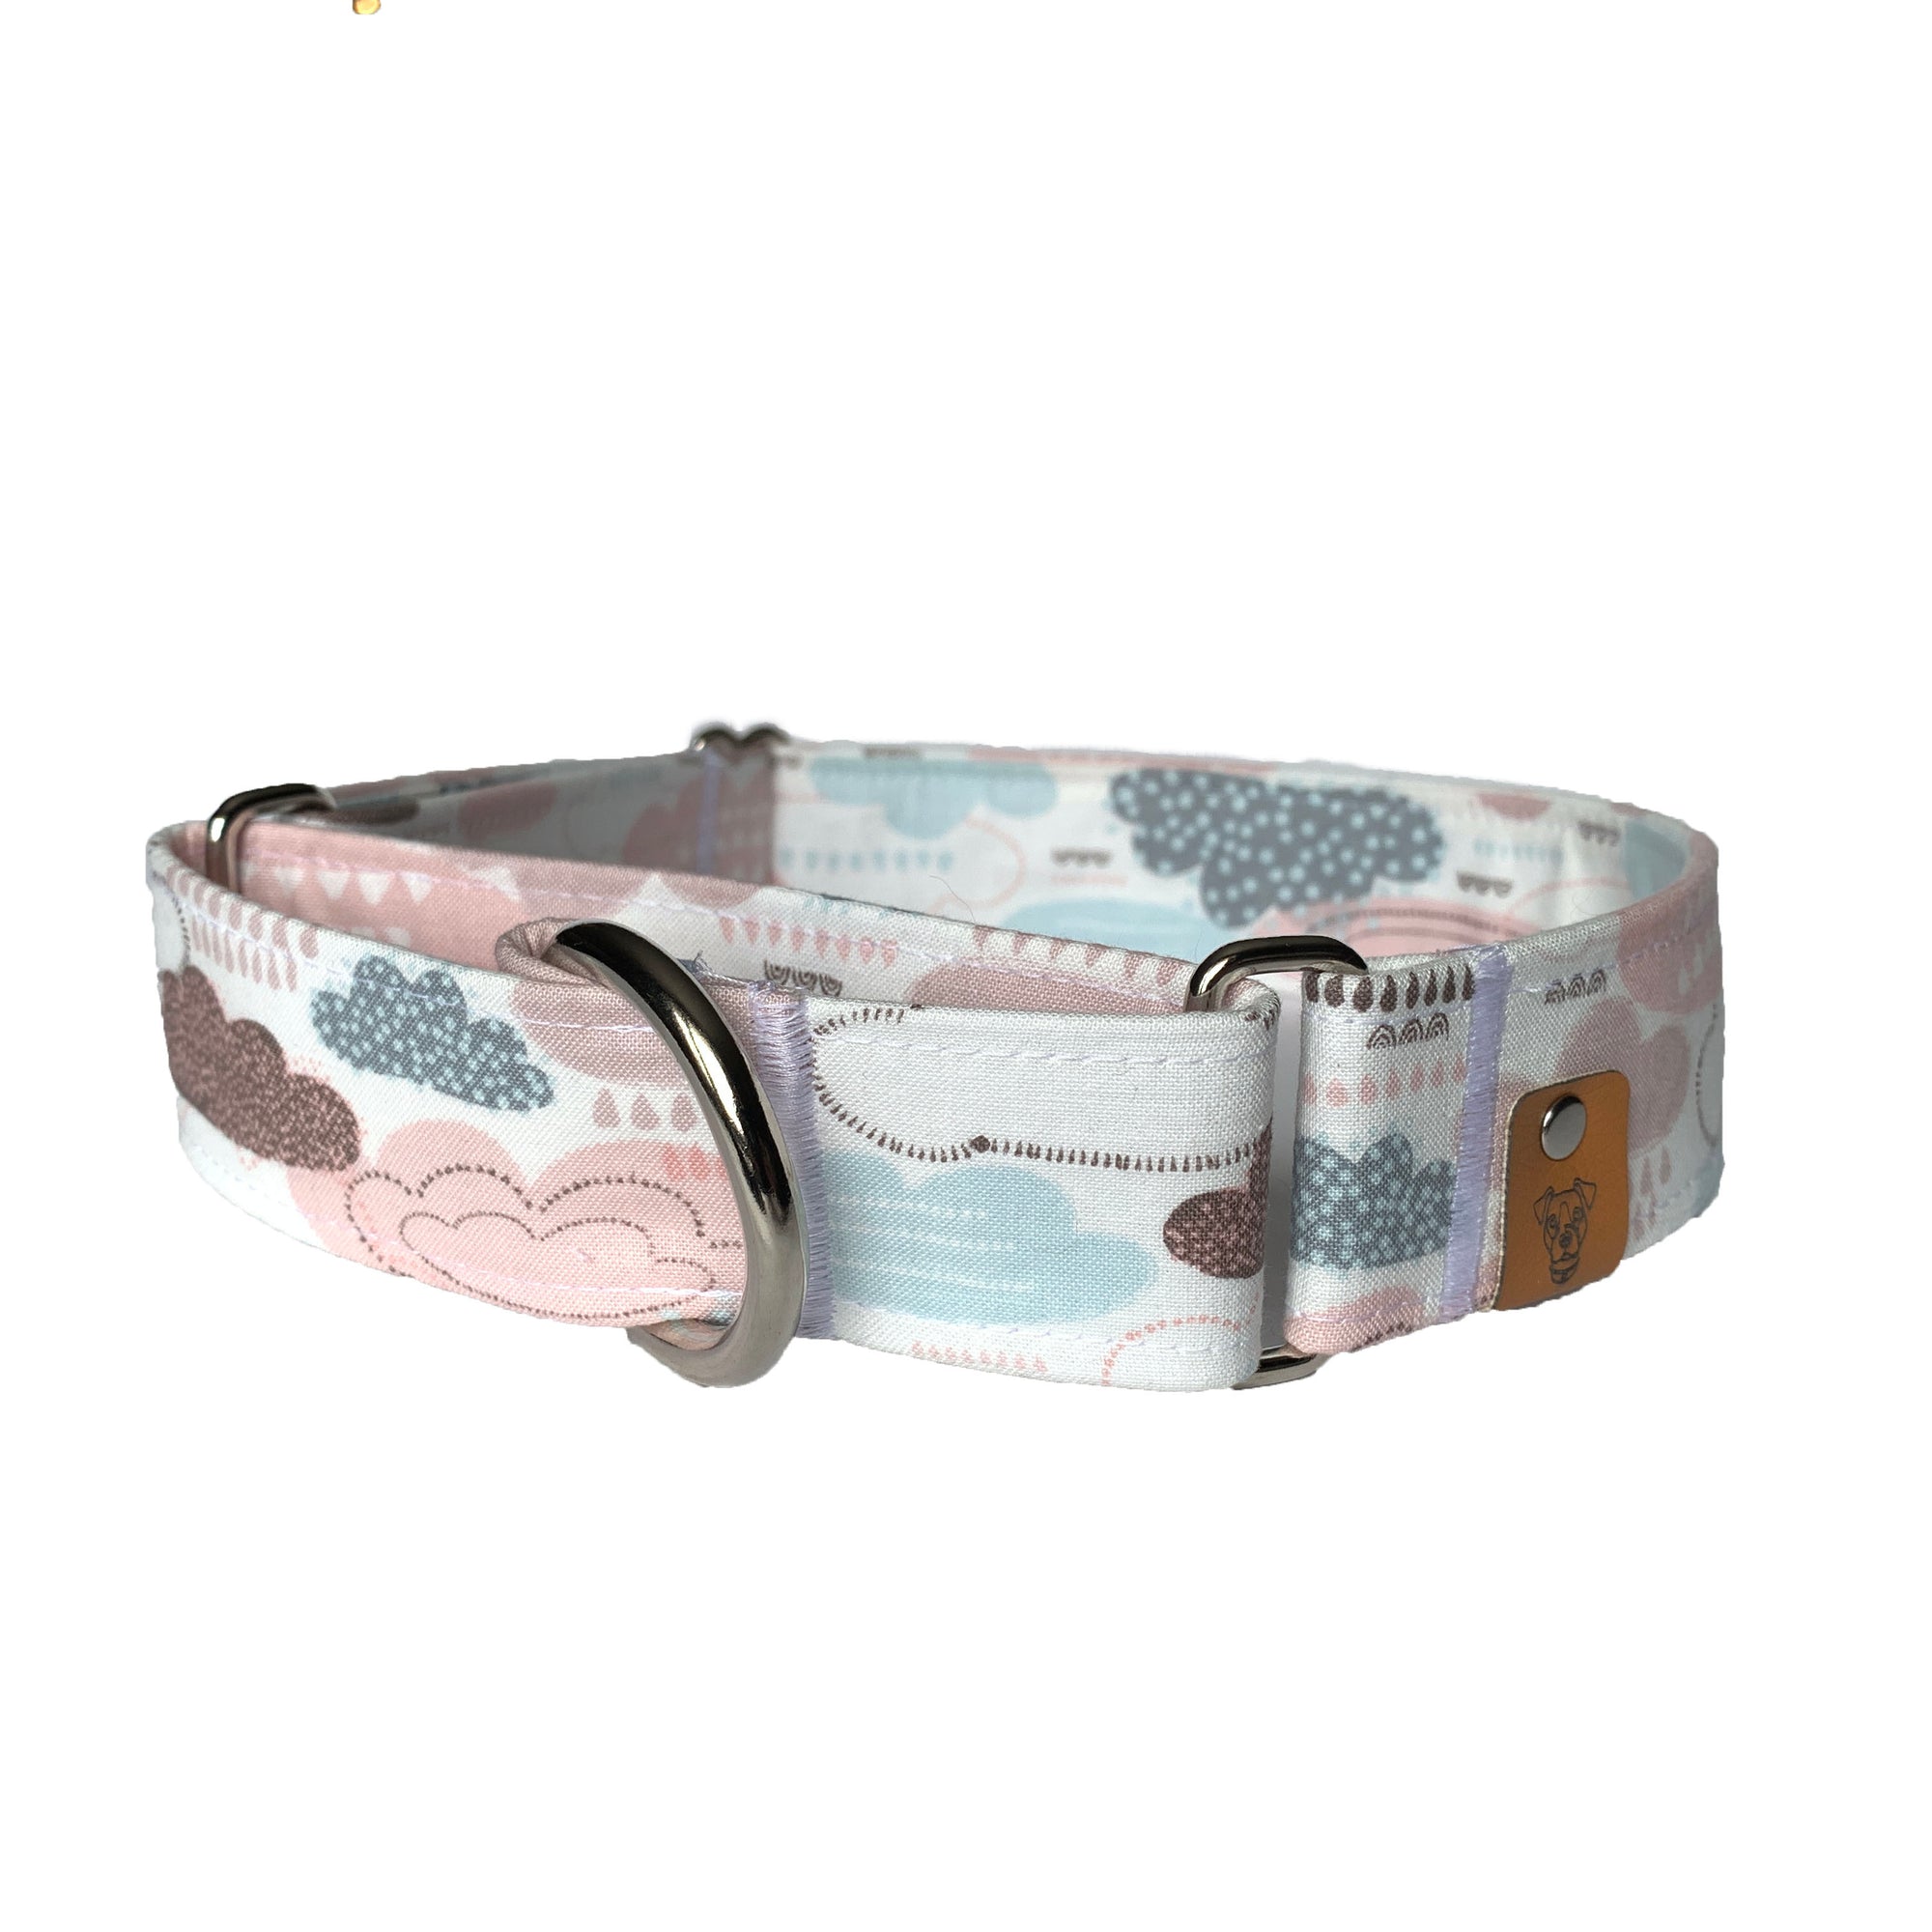 April Showers Martingale Collar - N.G. Collars